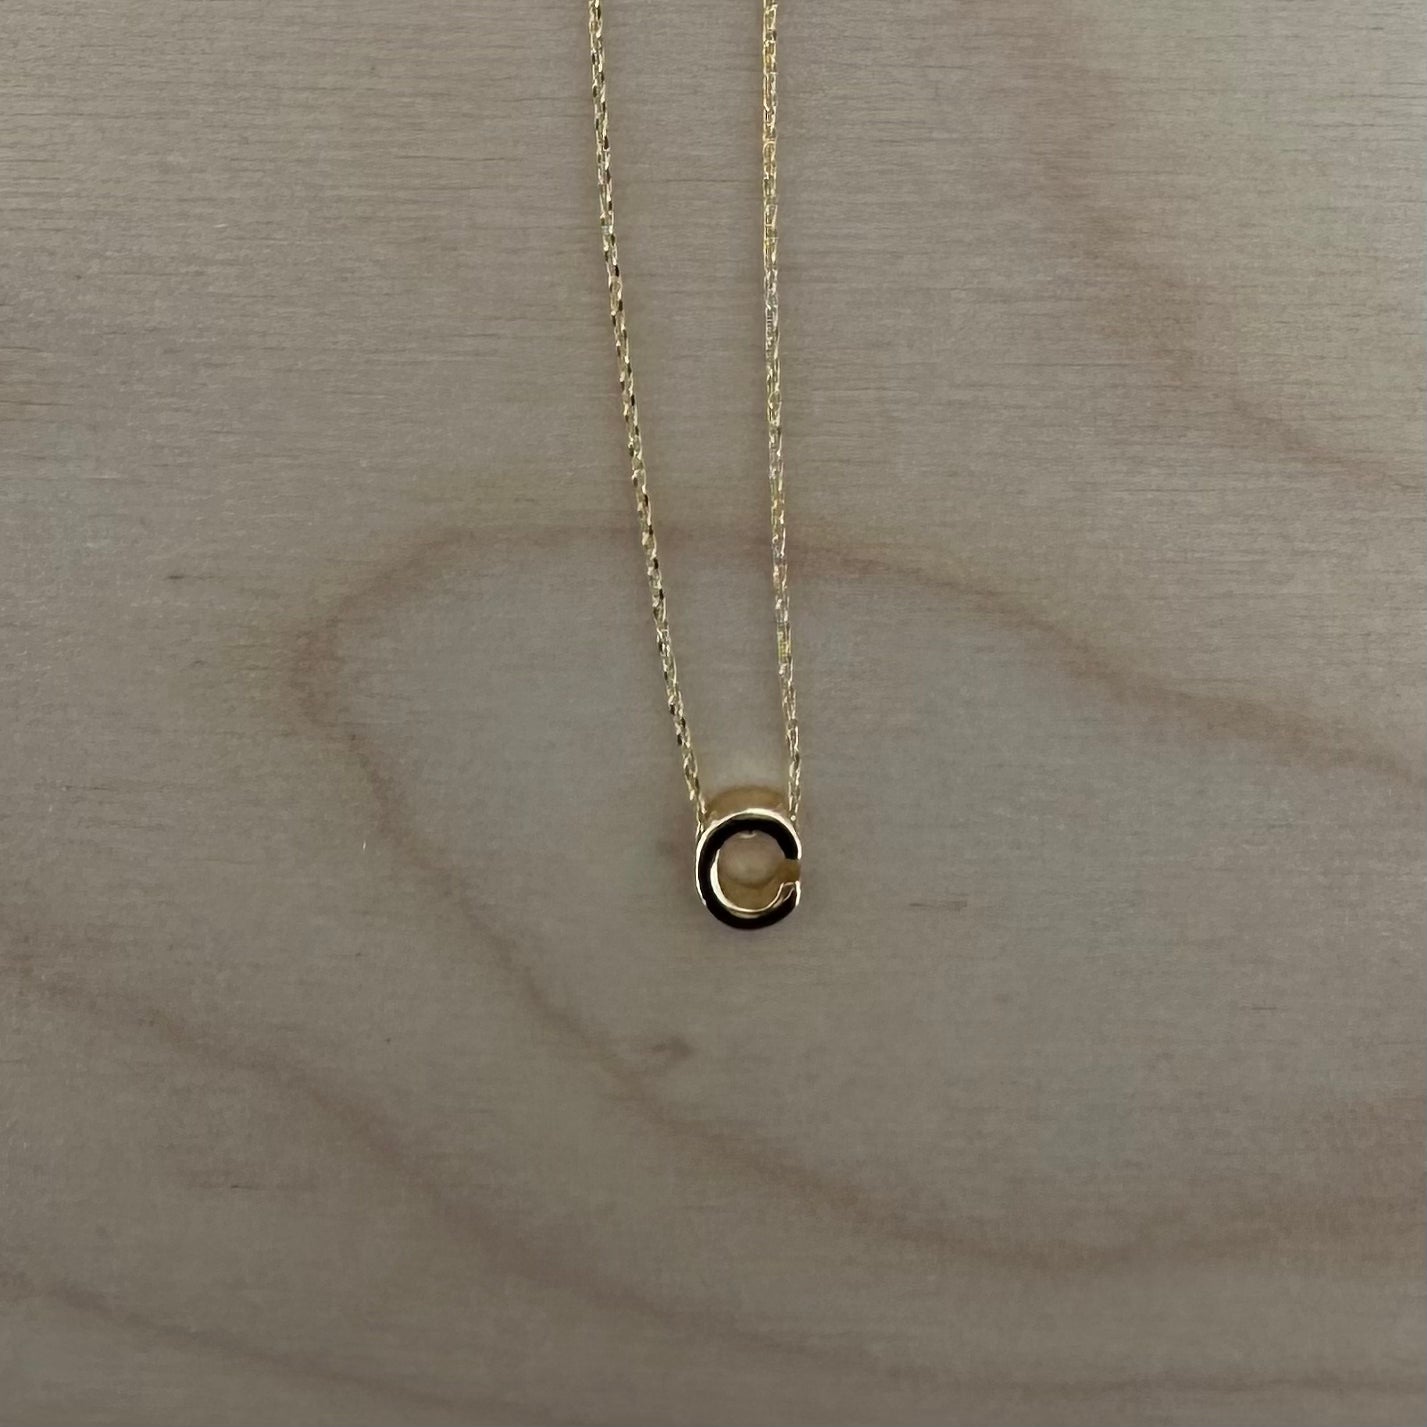 Gold initial necklace